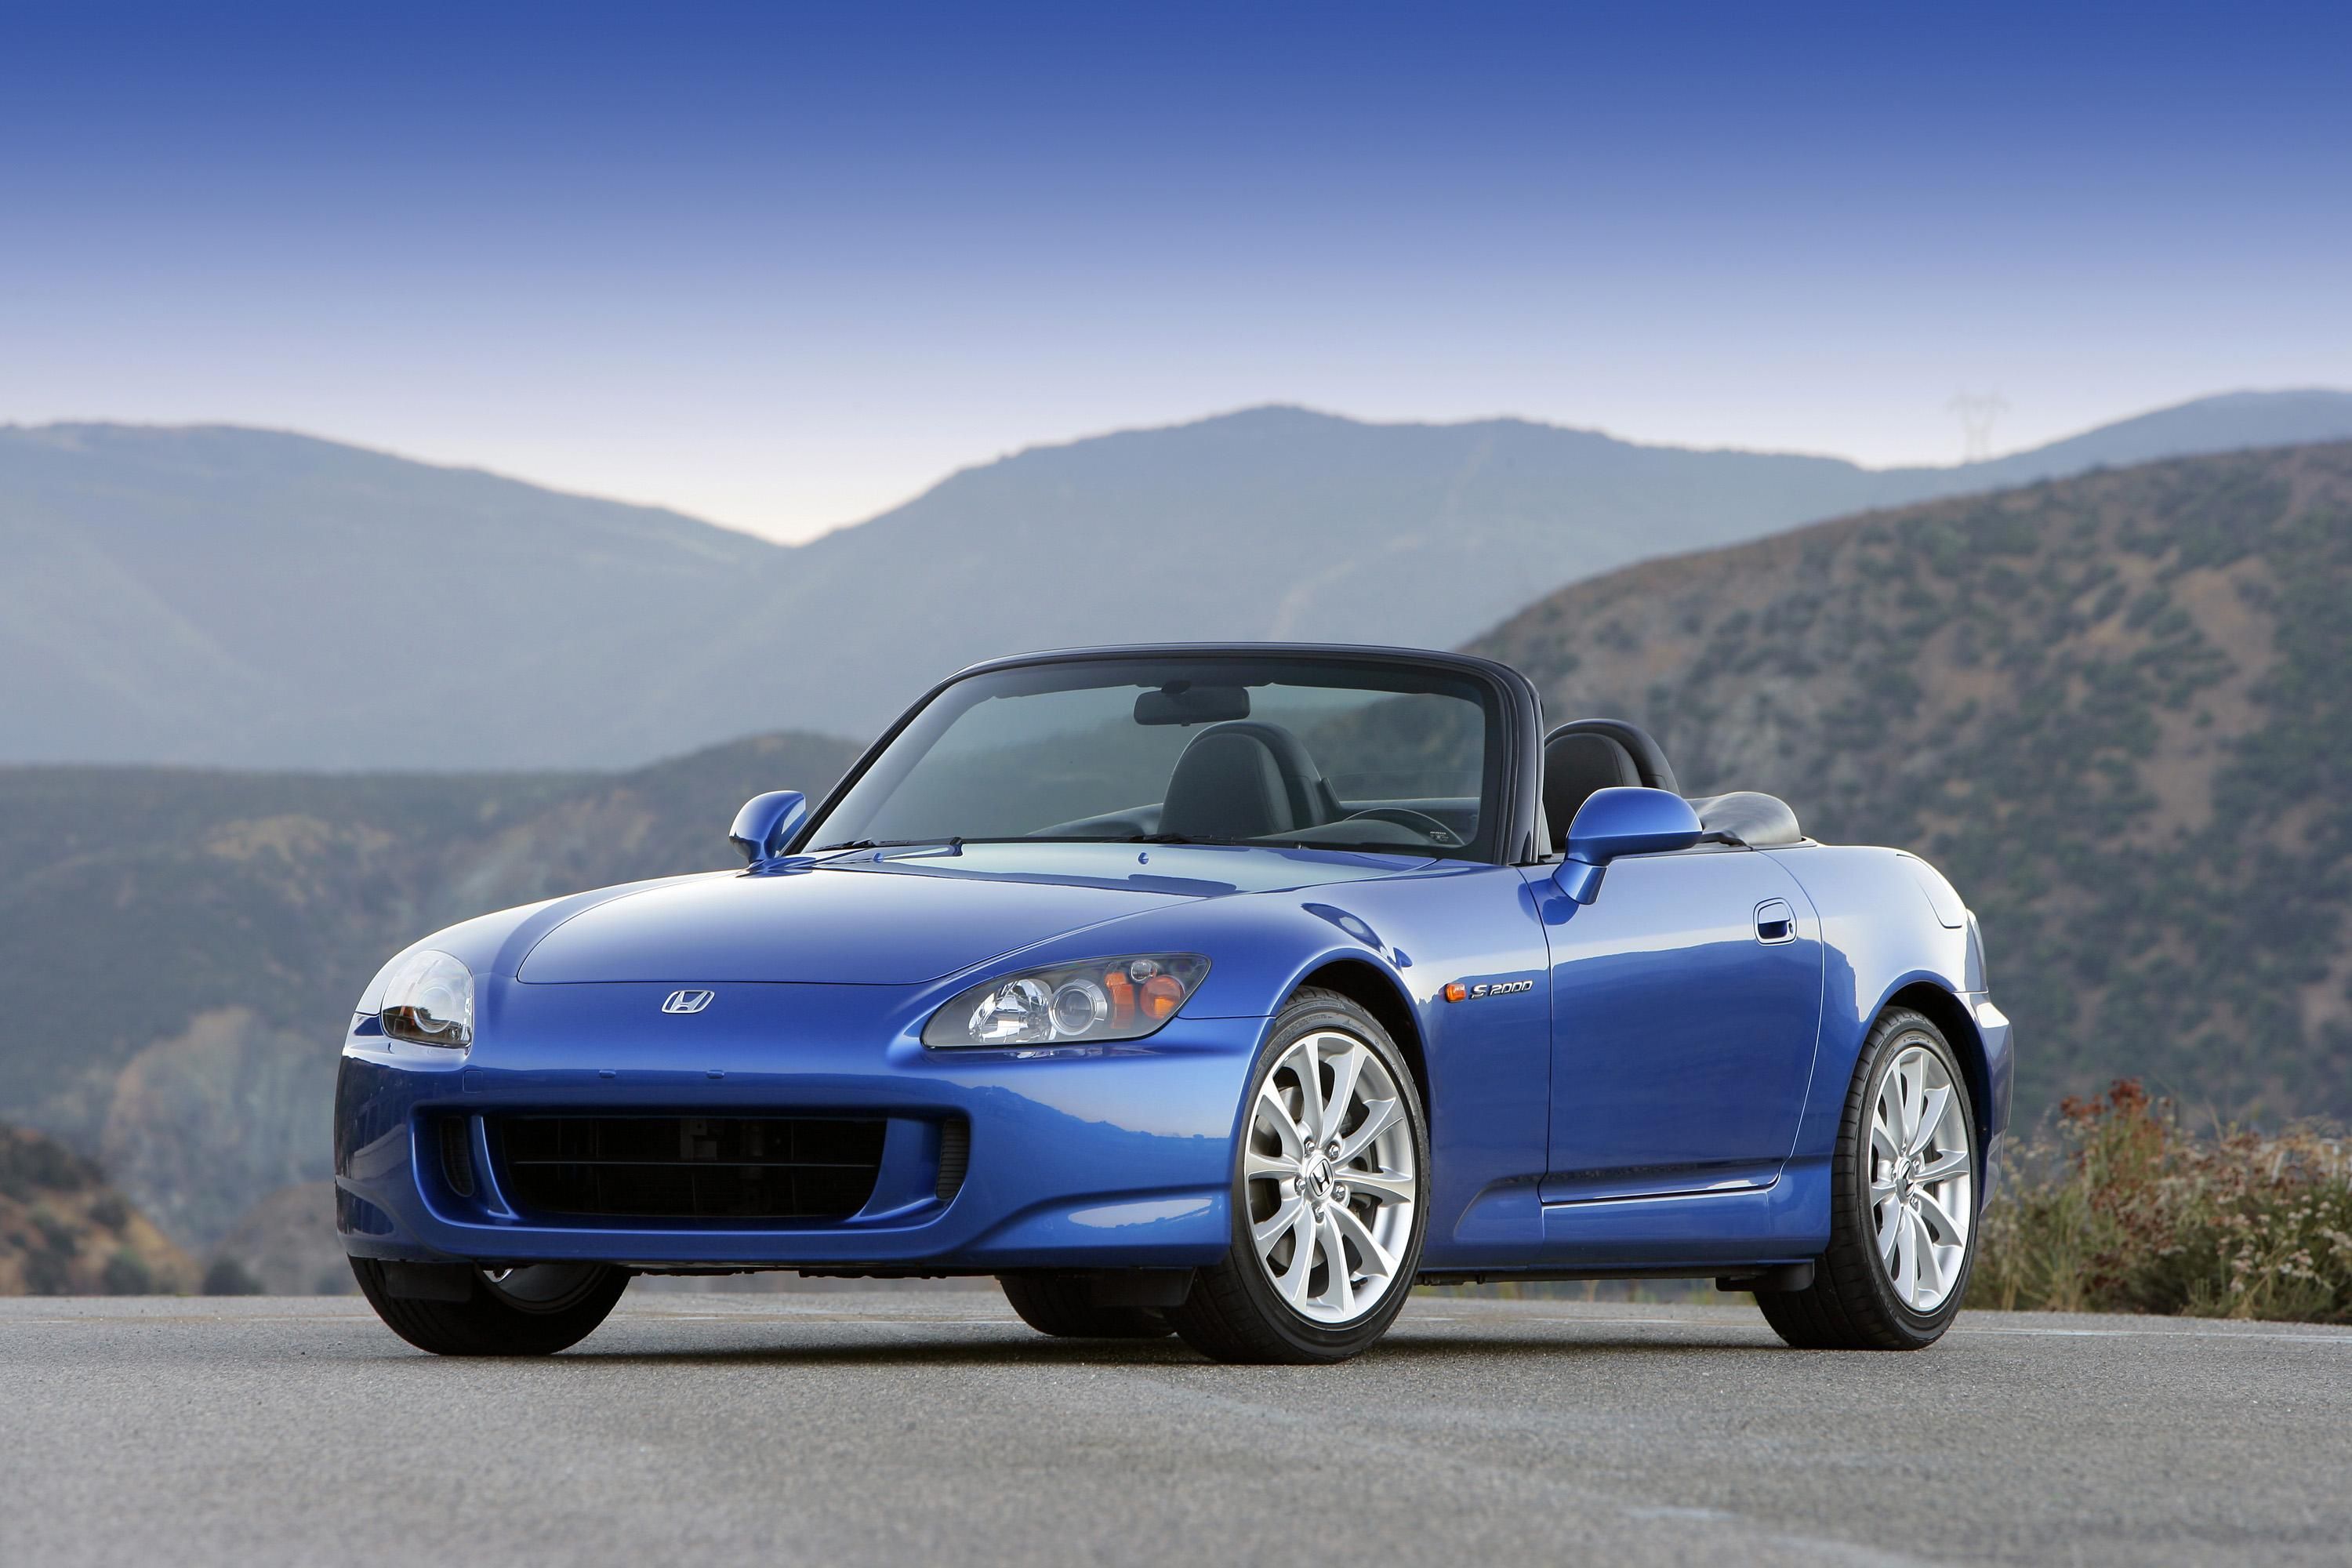 The New Honda S2000 Will Be A Game Changer